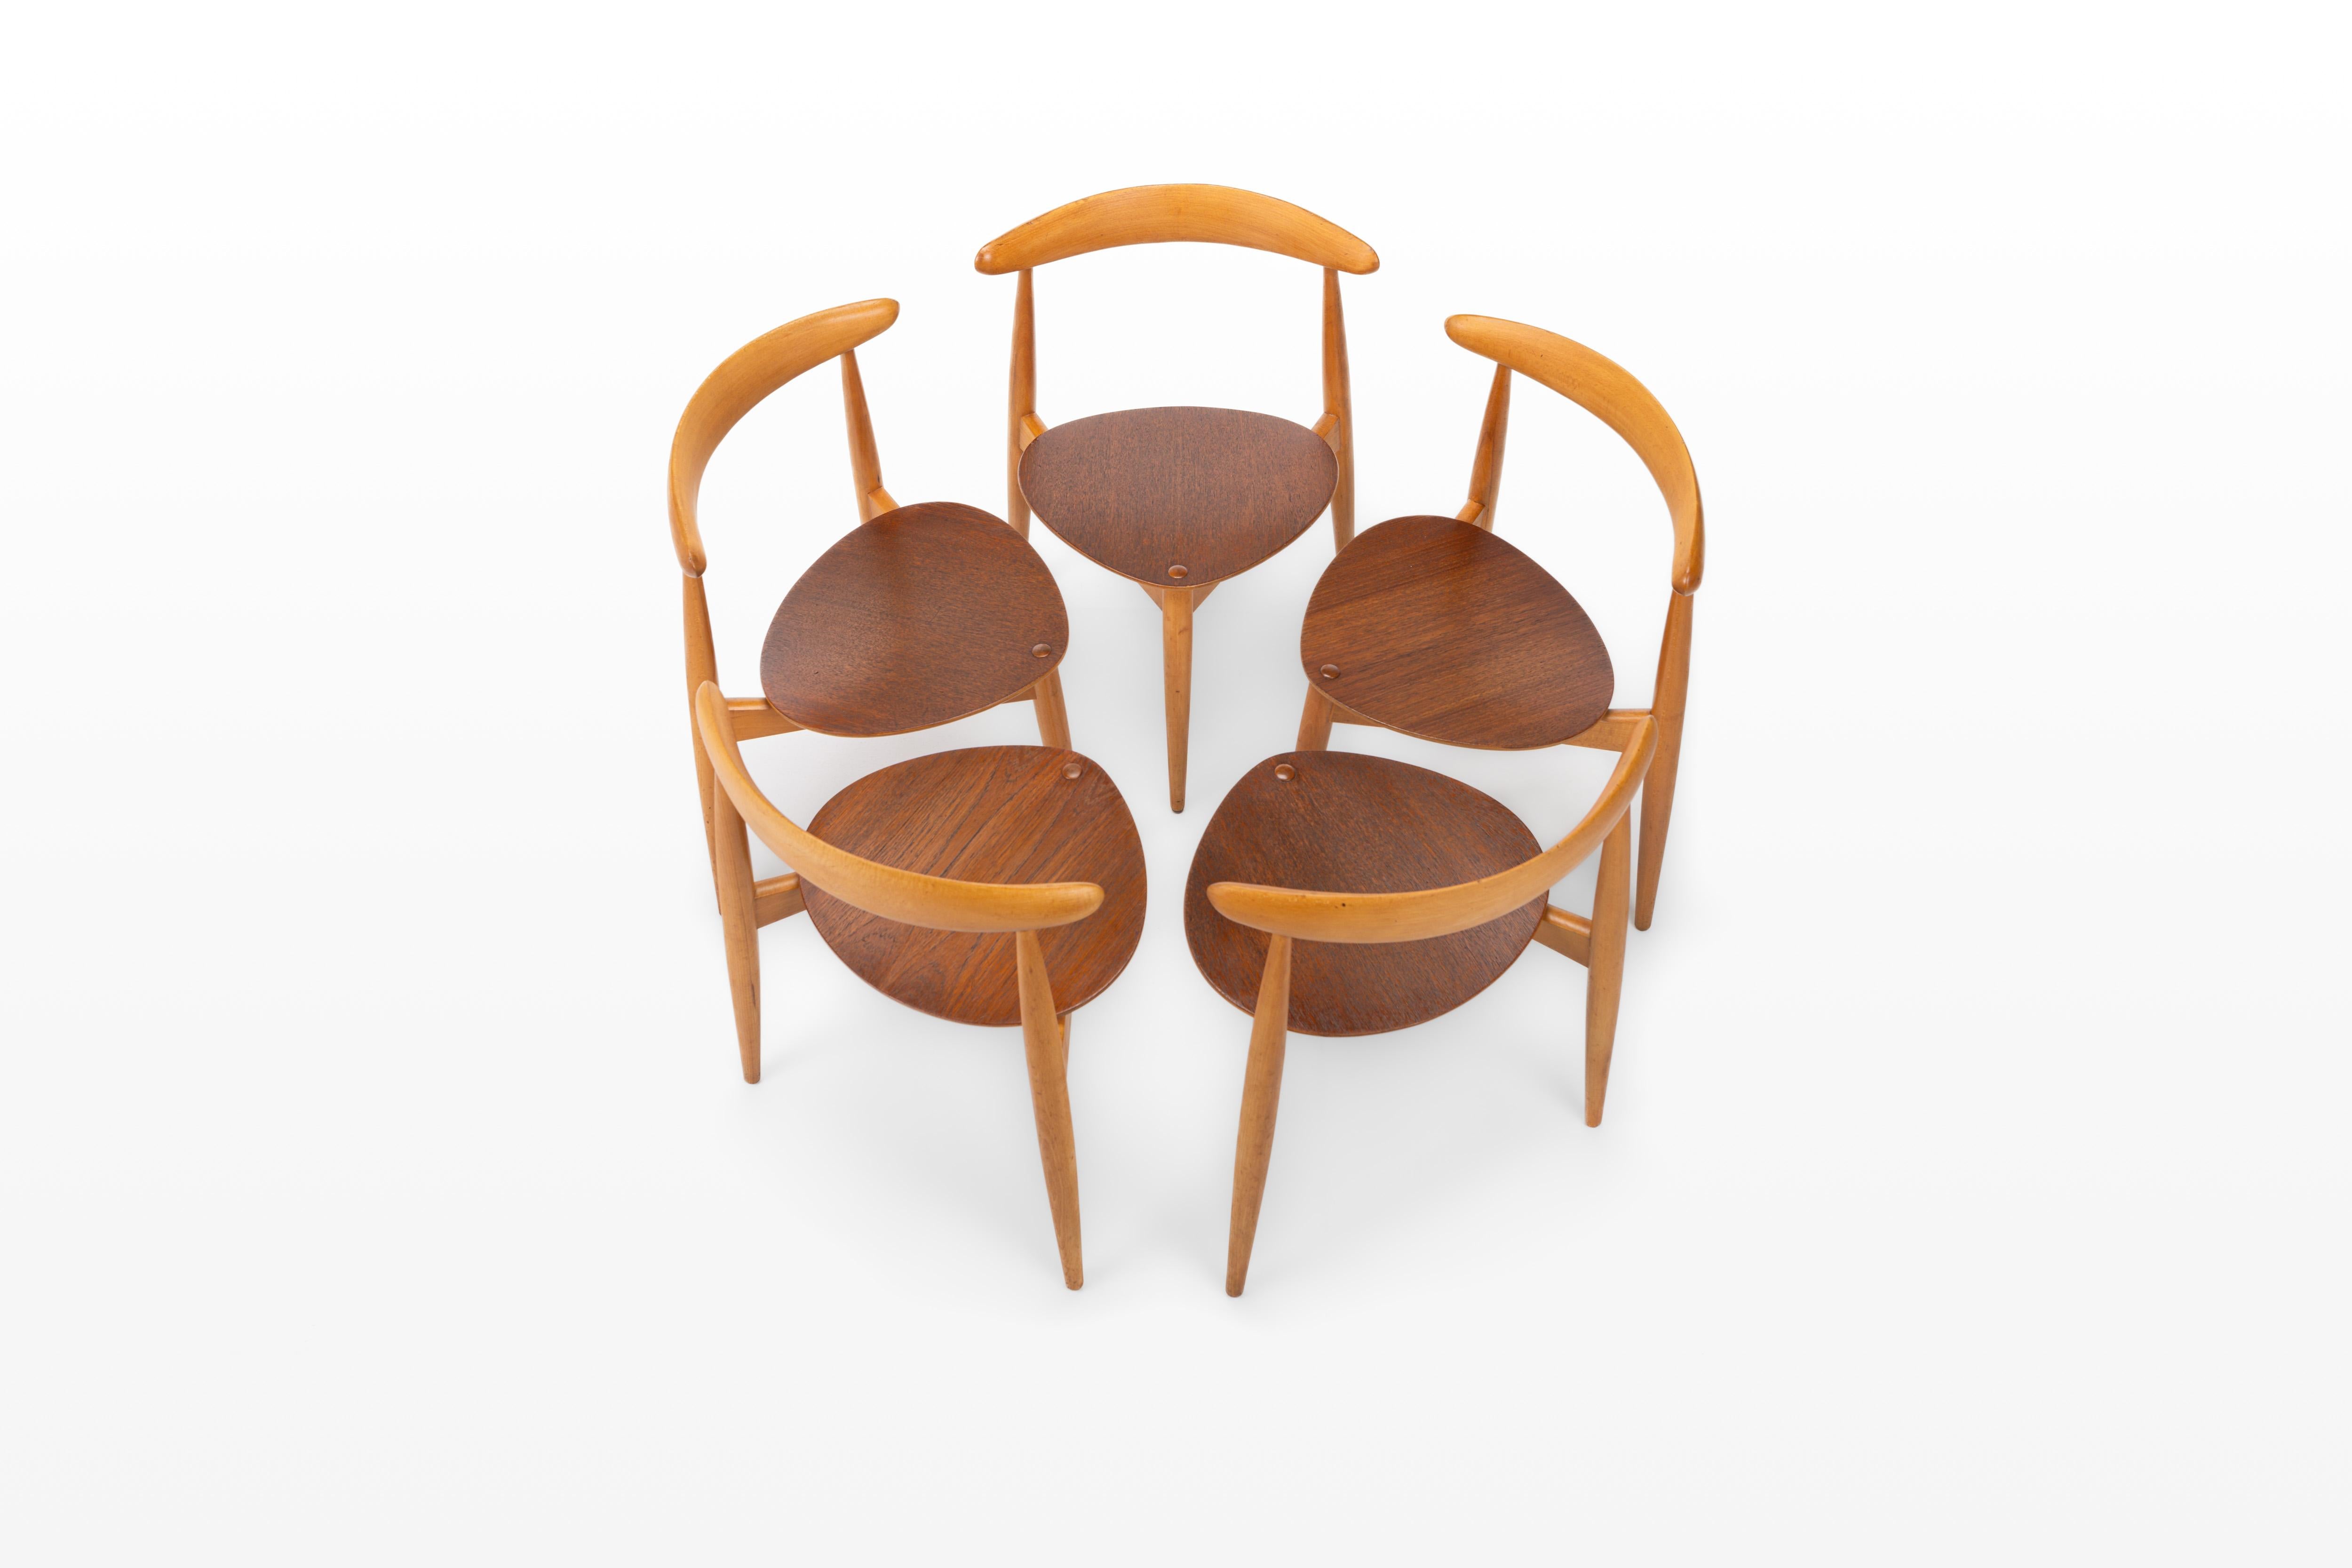 Set of five vintage 'heart' dining chairs designed by Hans J. Wegner for Fritz Hansen, Denmark 1950s. Designed as model 'FH4103'. The chairs have a beech frame and a teak seating. These three-legged chairs are stackable and are in great